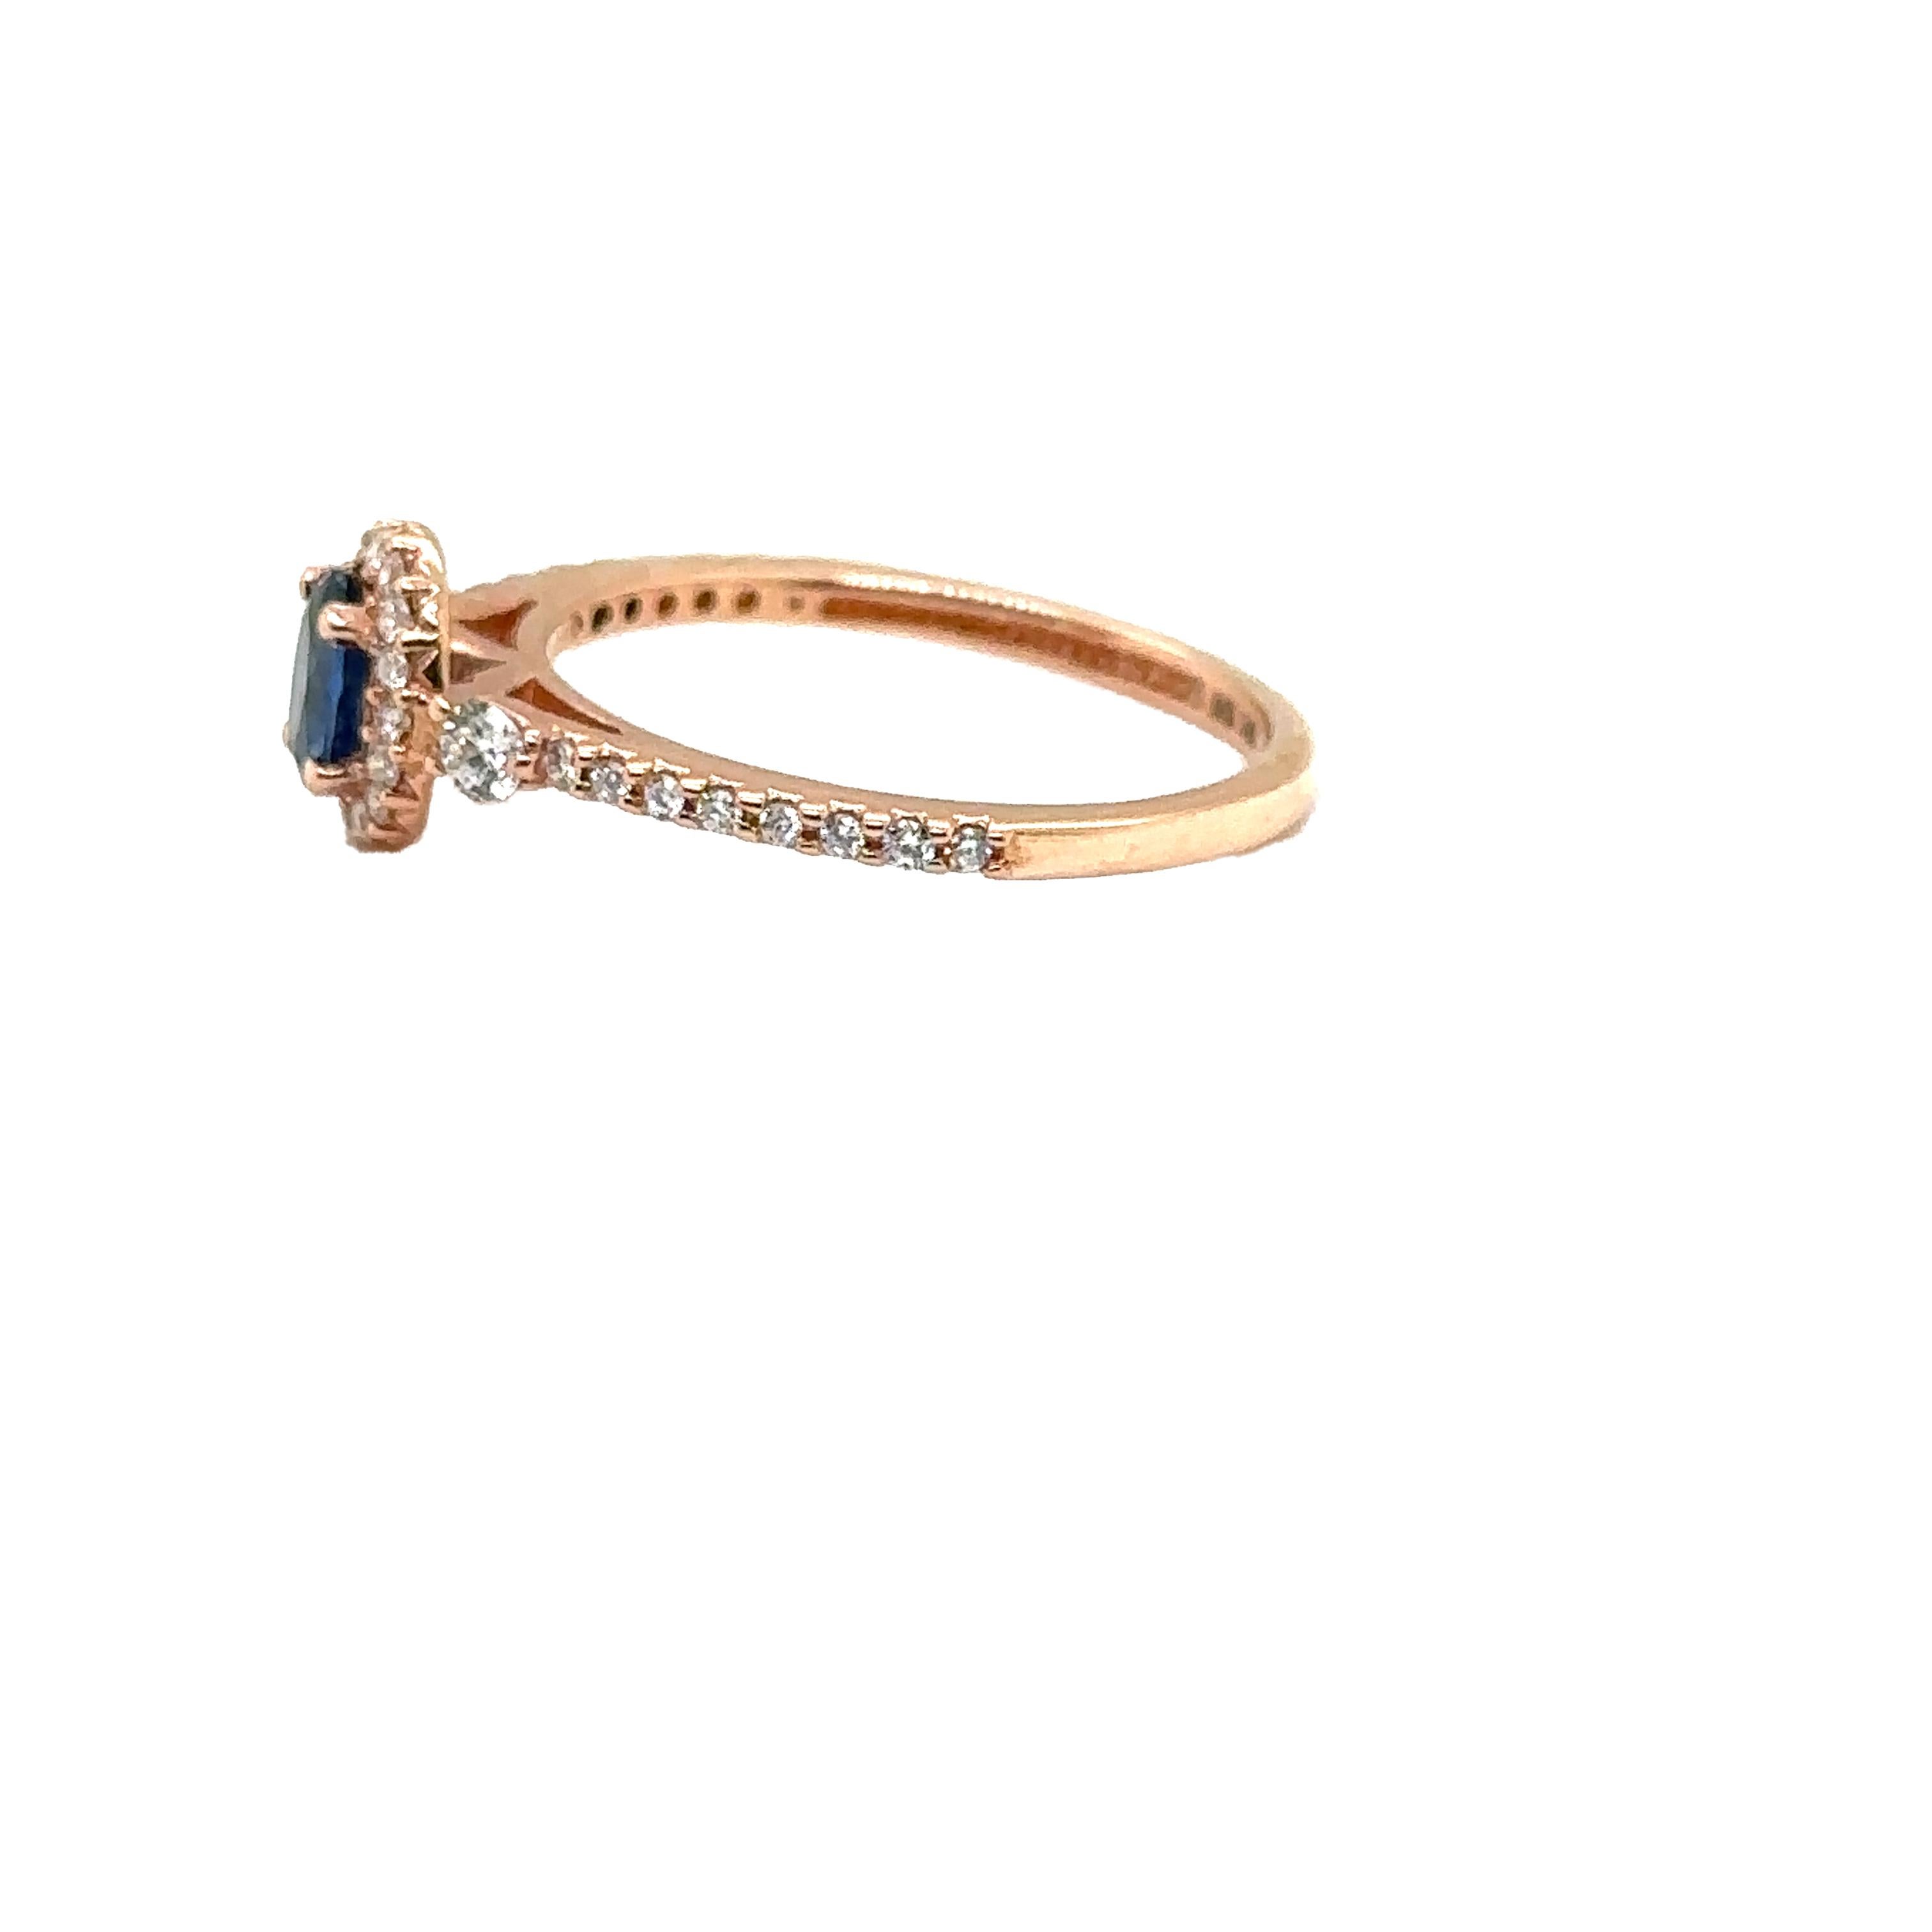 JAS-21-2238 - 14K ROSE GOLD OVAL SAPPHIRE RING with DIAMONDS For Sale 2